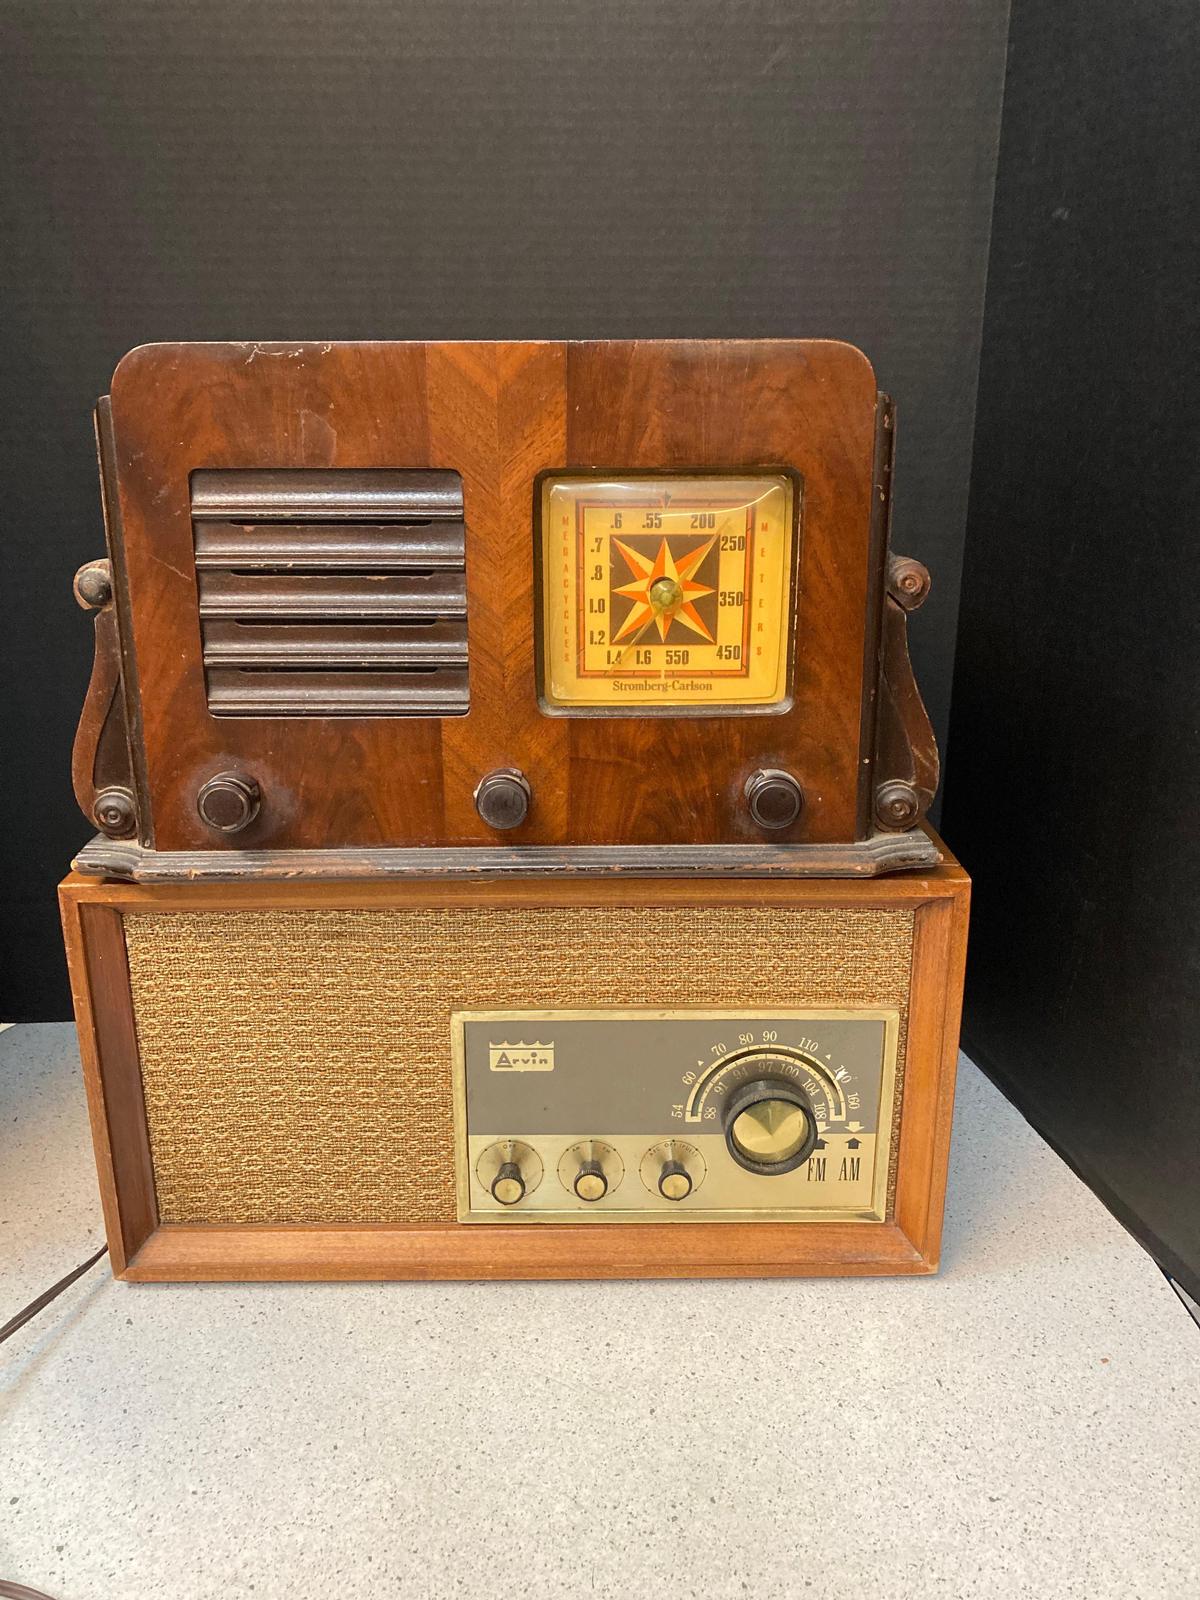 Two vintage radios Stromberg-Carlson and Arvin